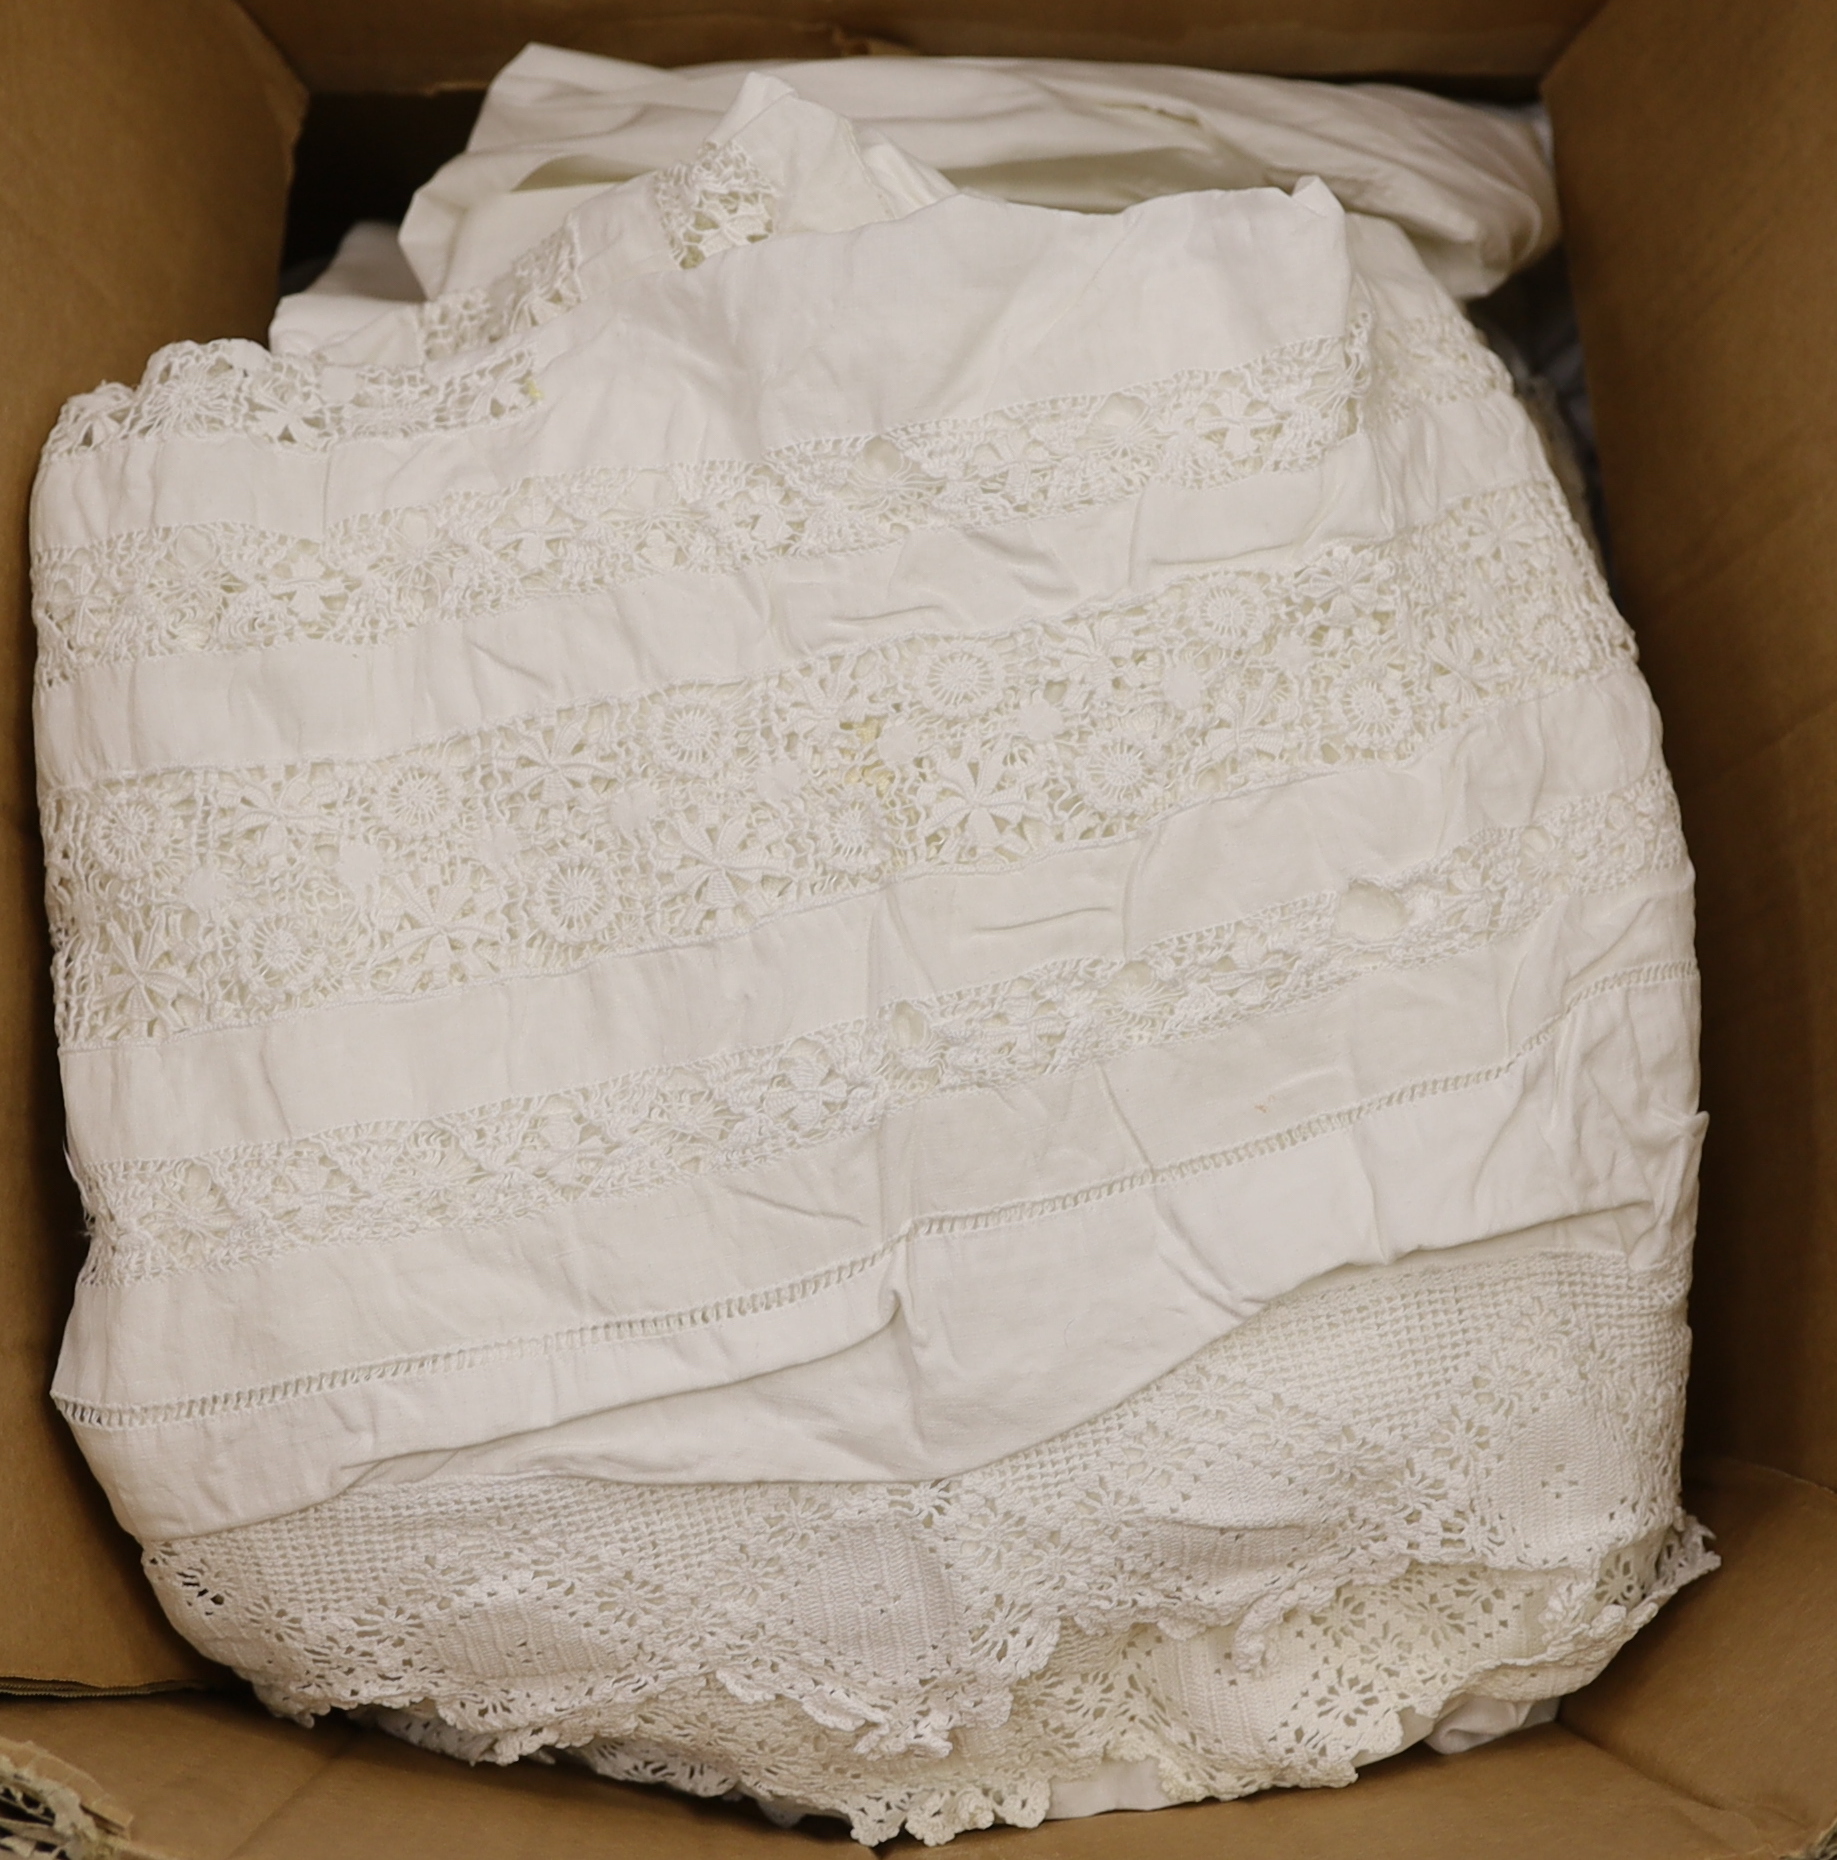 A quantity of embroidered crochet edged table cloths, runners, damask towels and napkins, and a Victorian style gentleman's bed shirt, etc.                                                                                 